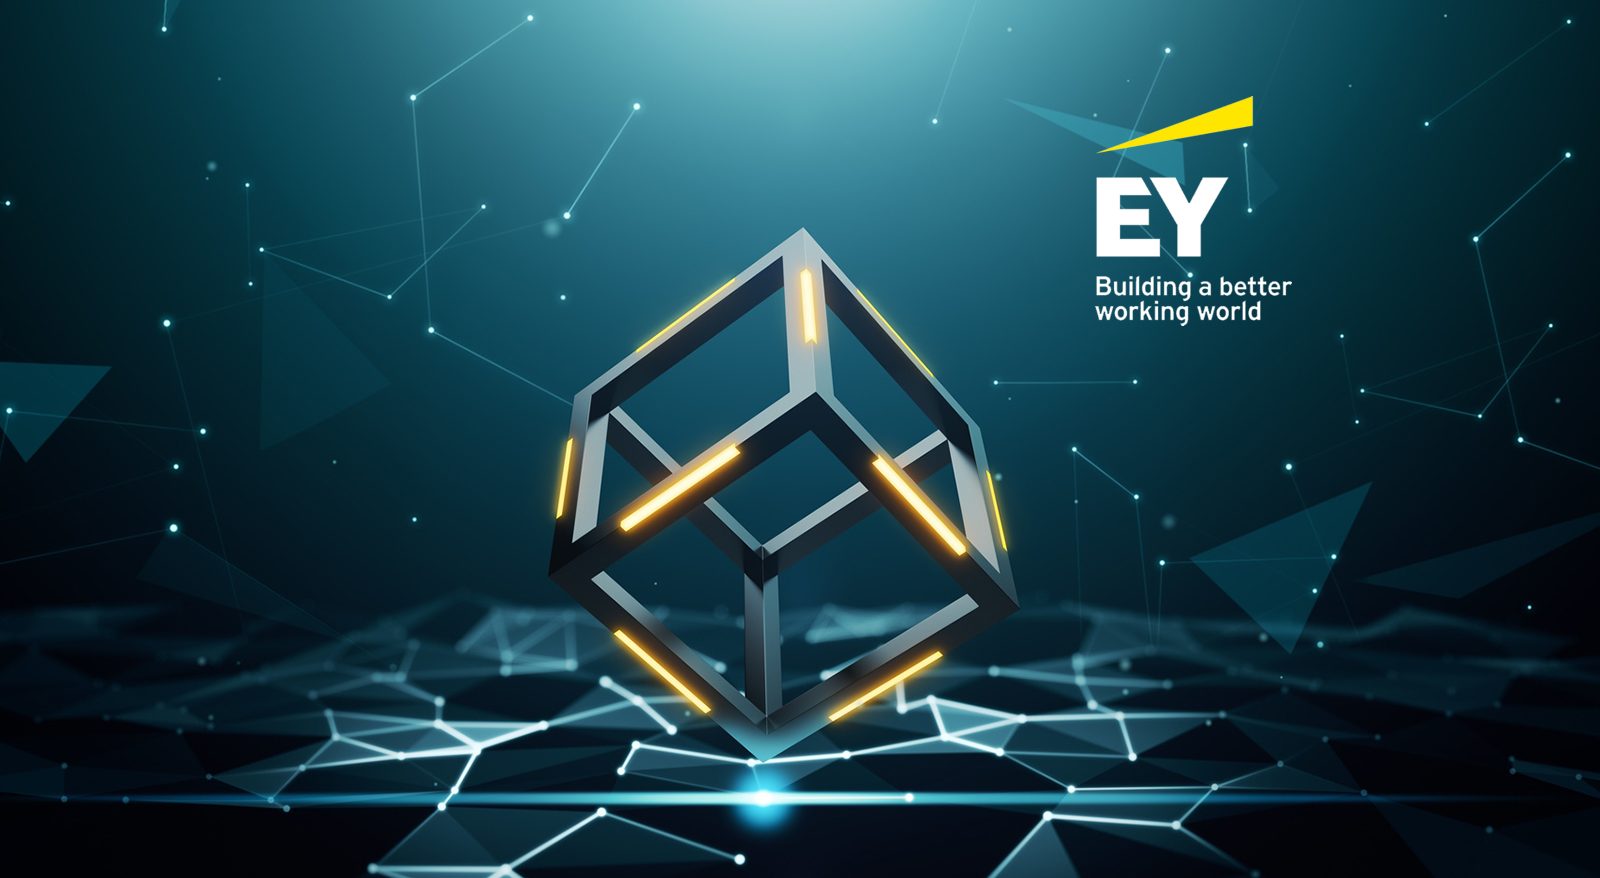 EY Releases New Version of Zero-Knowledge Proof Blockchain to Public Domain  - Blockchain Conference